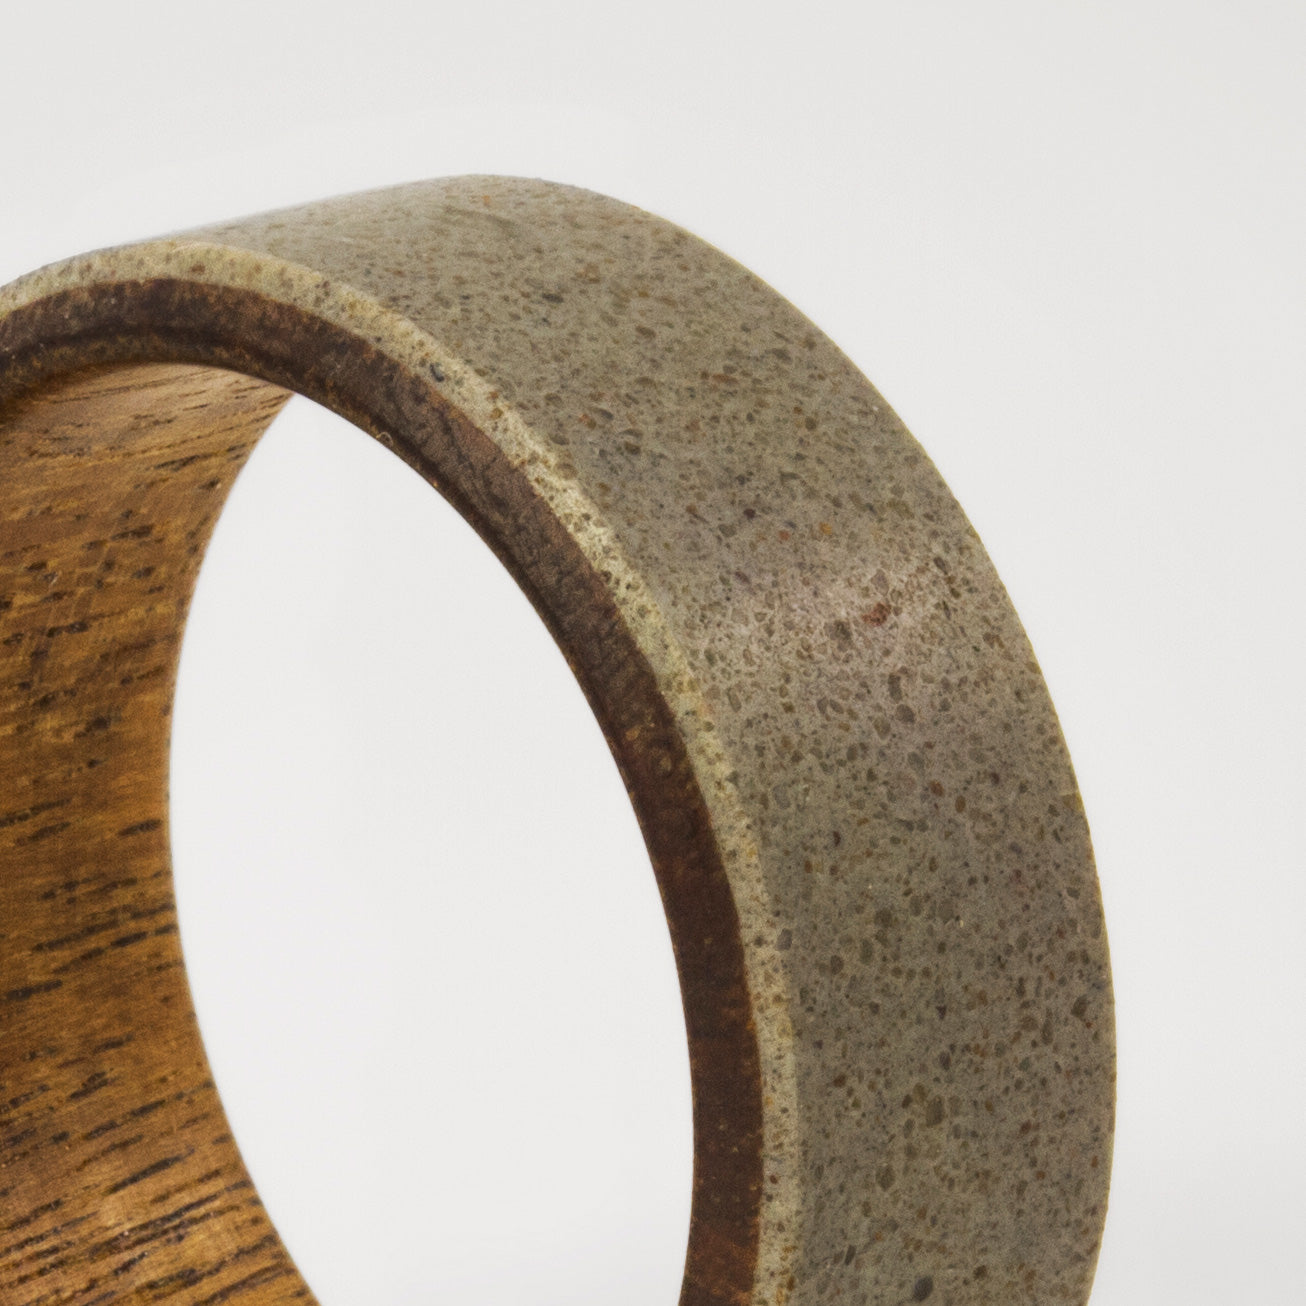 Gray concrete & incense wood ring